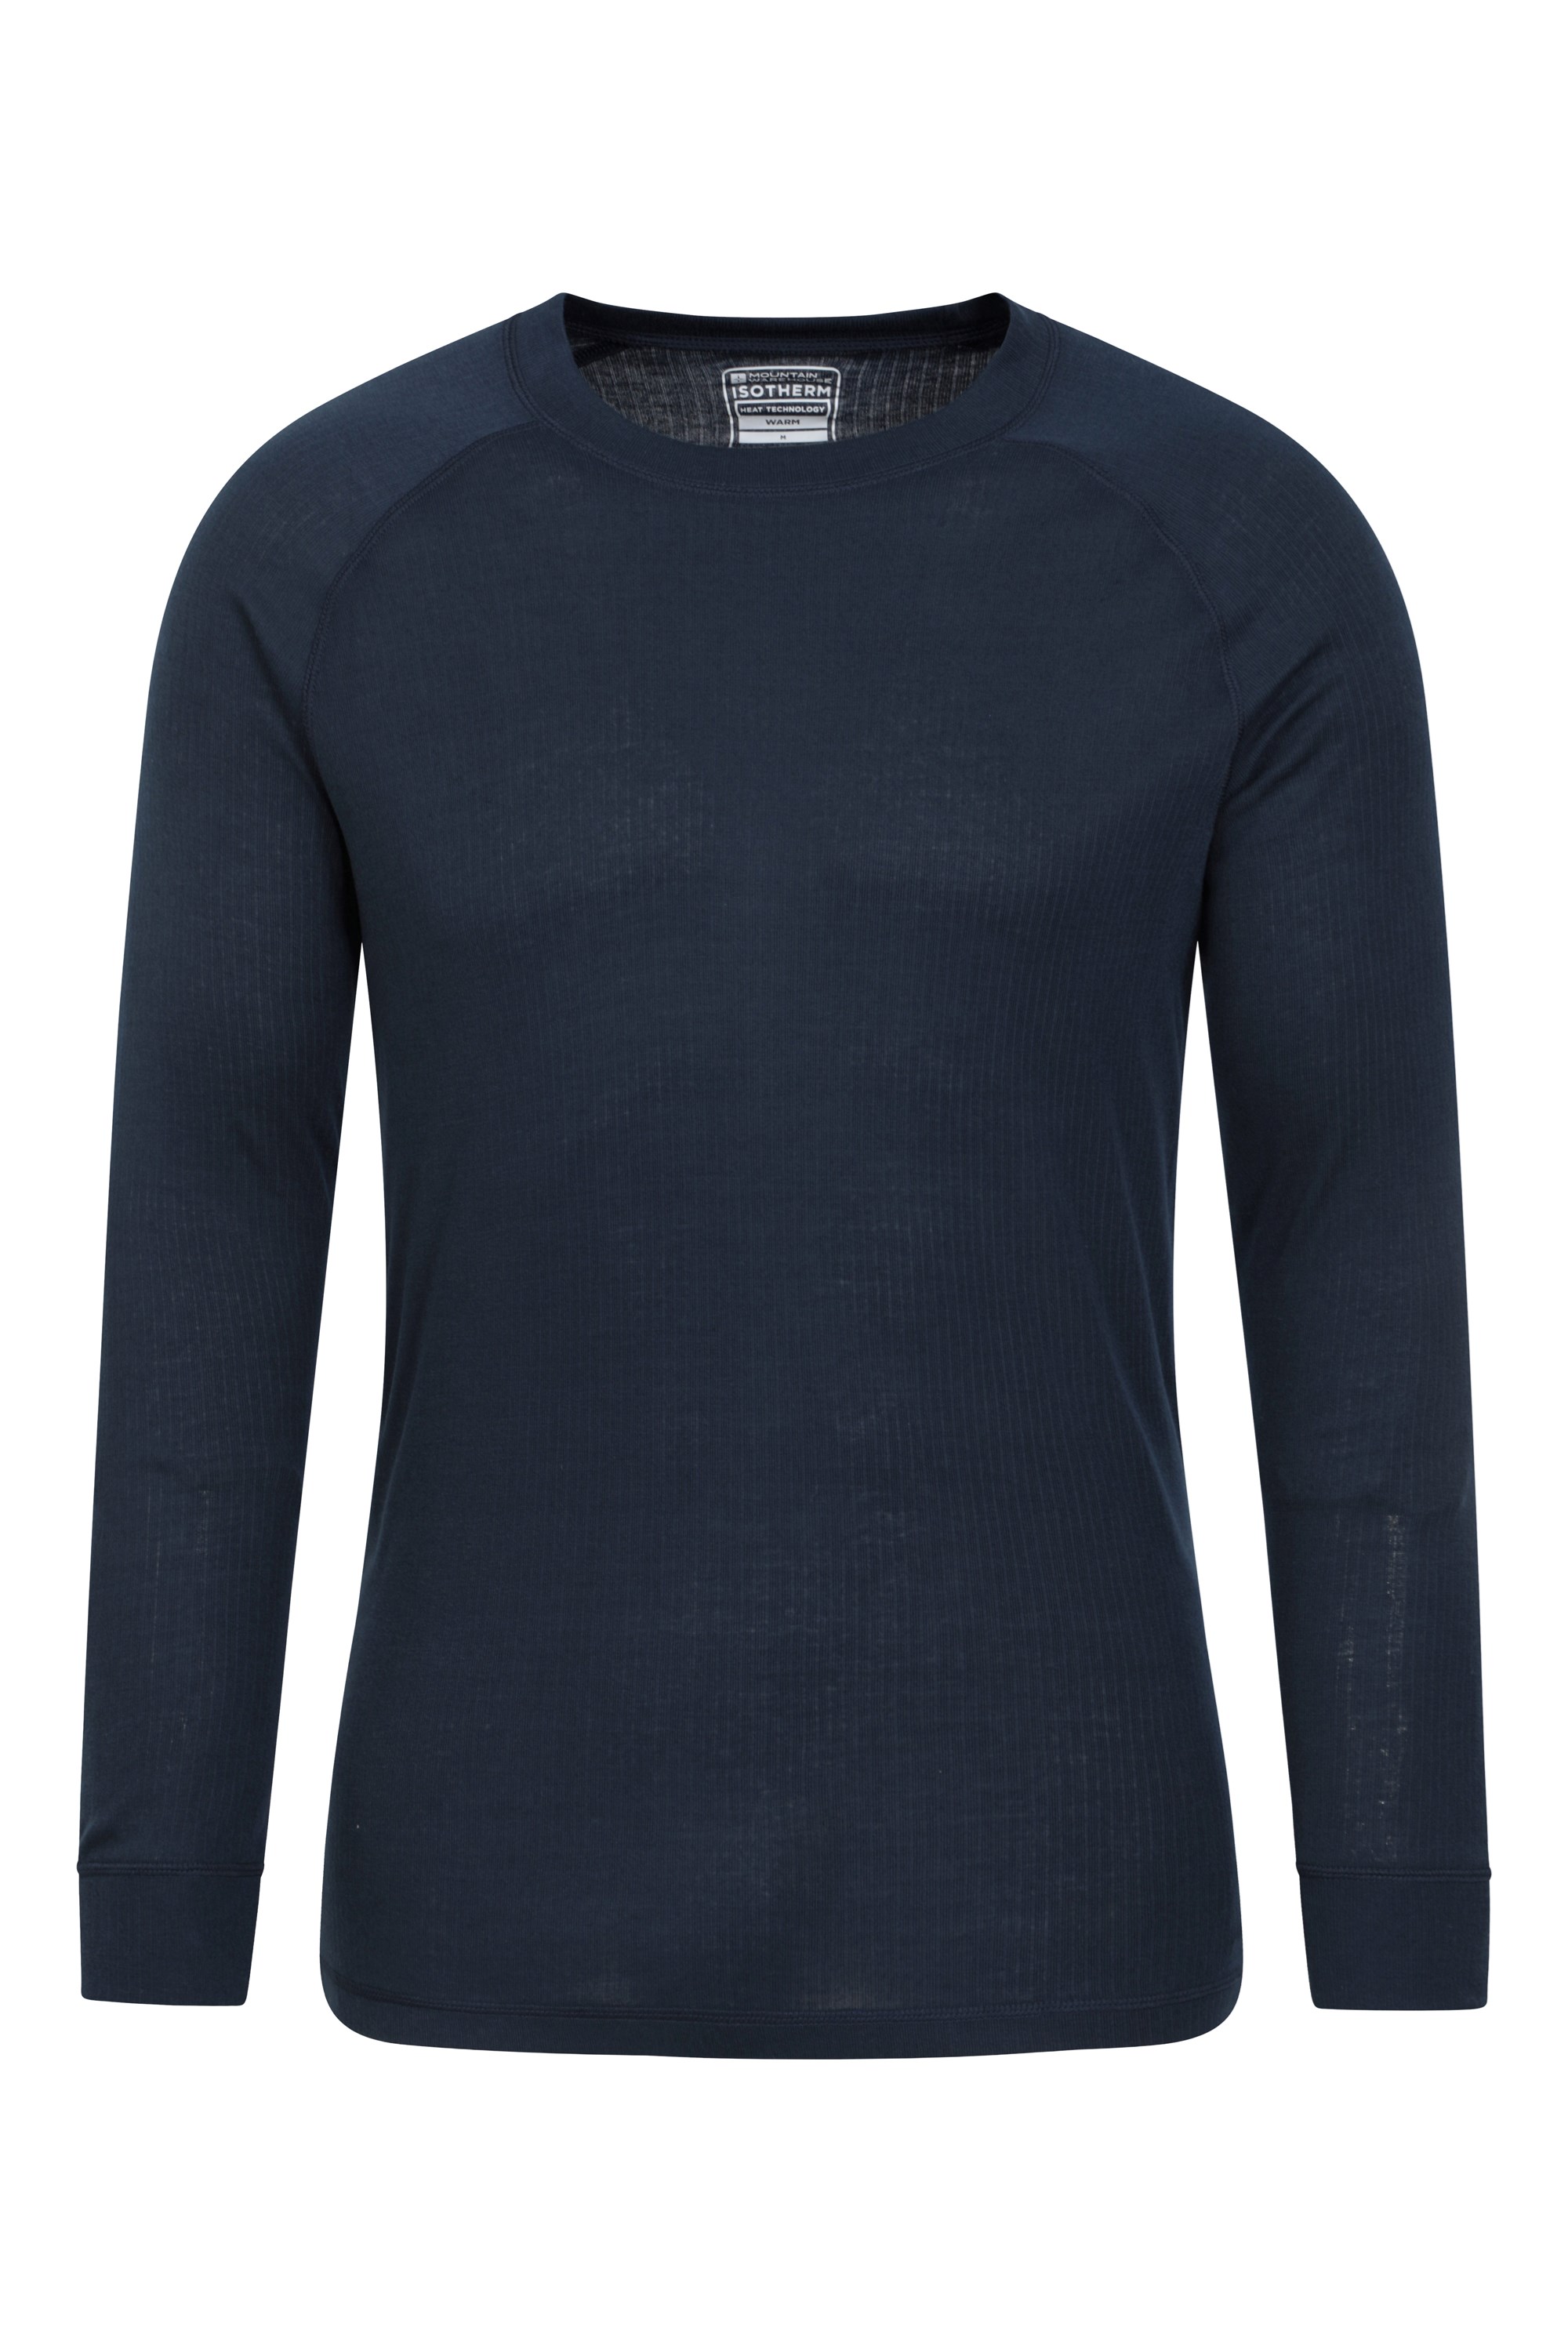 Talus Mens Long Sleeved Round Neck Top - Blue